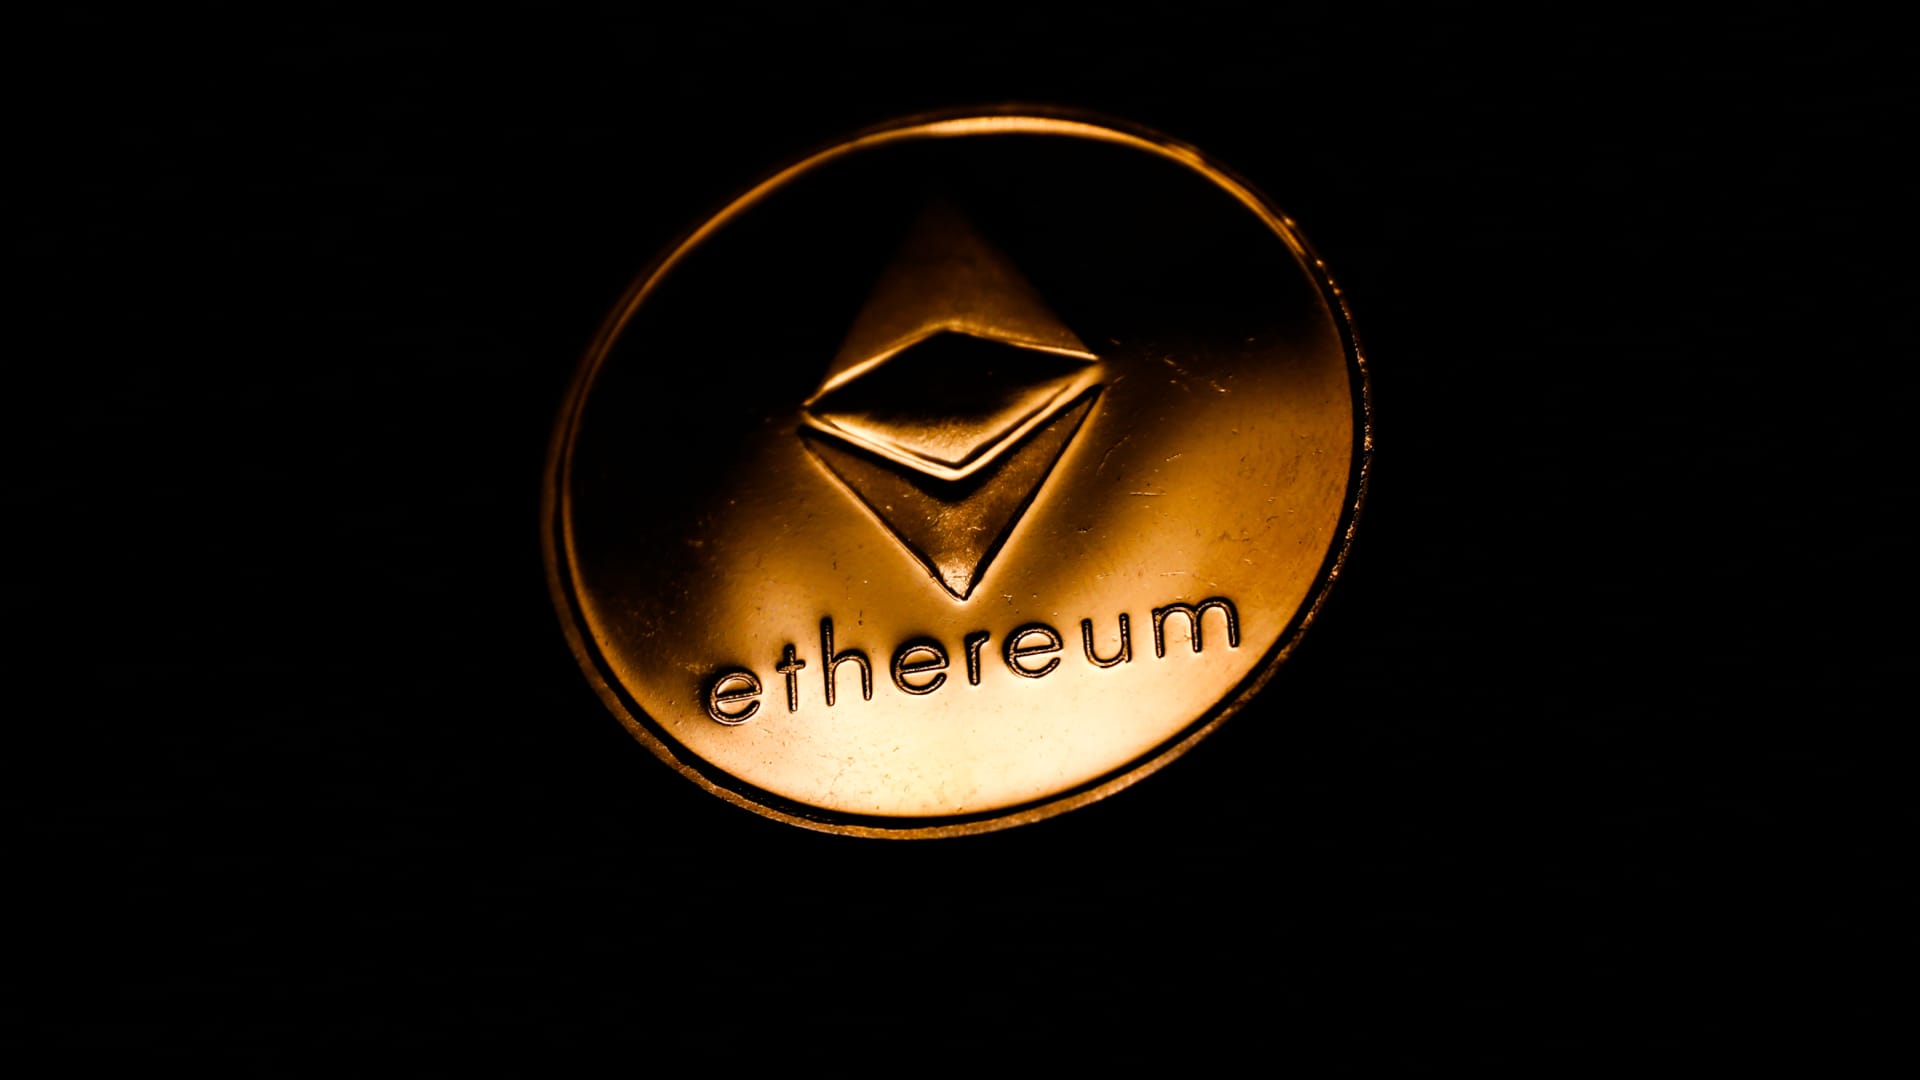 Ether drops 15% since major Ethereum network upgrade as traders take profits and fret over rate hikes